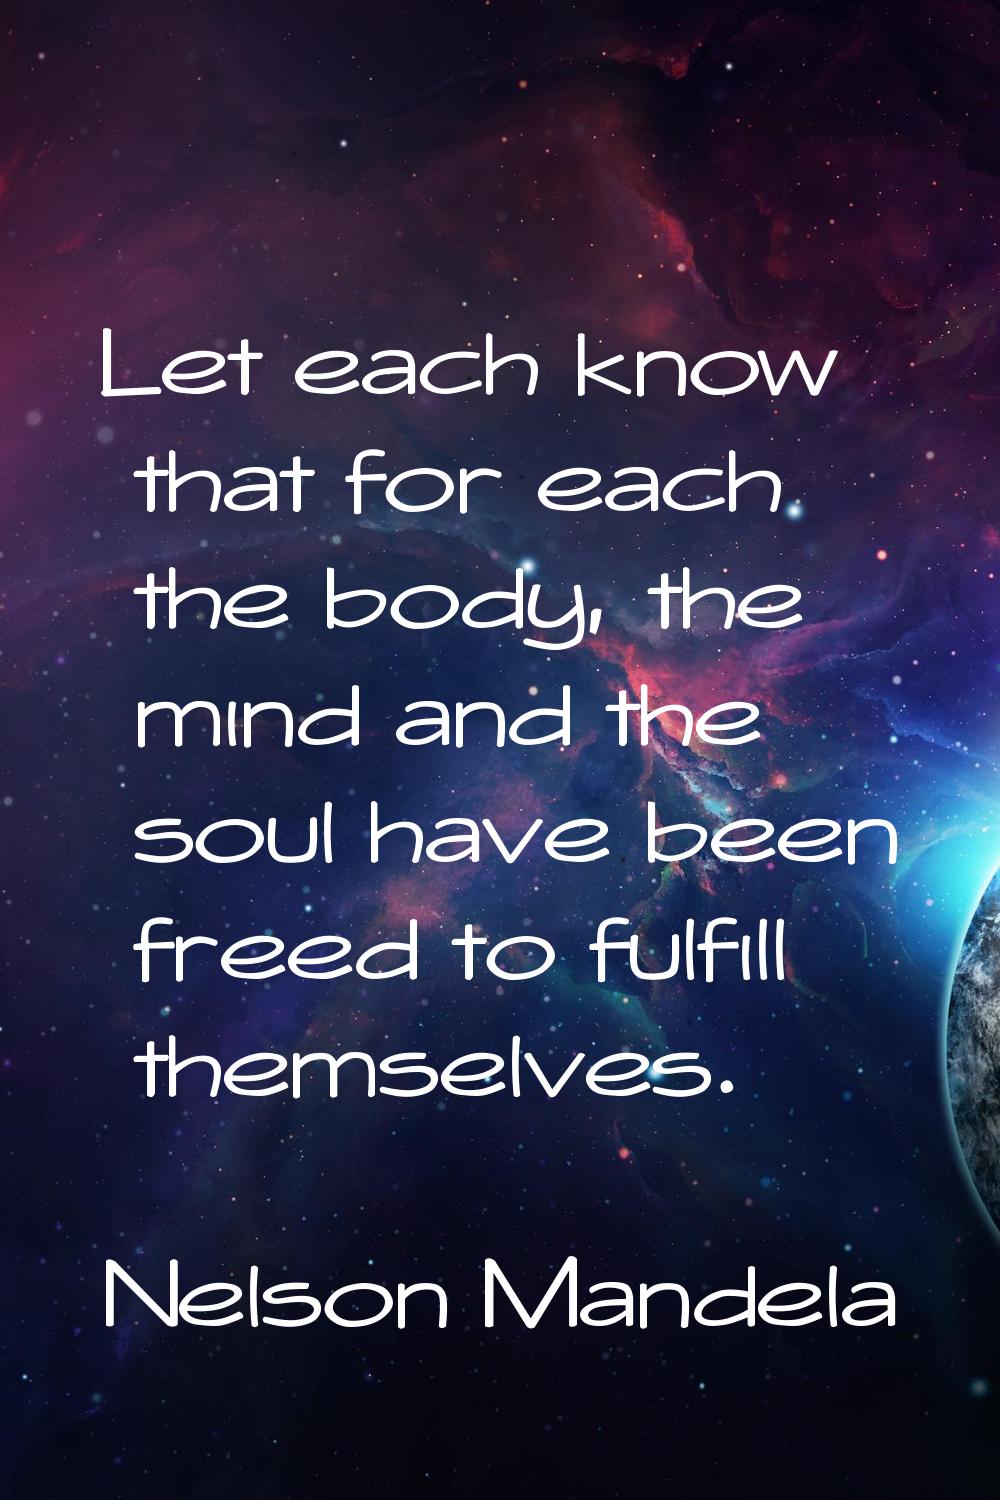 Let each know that for each the body, the mind and the soul have been freed to fulfill themselves.